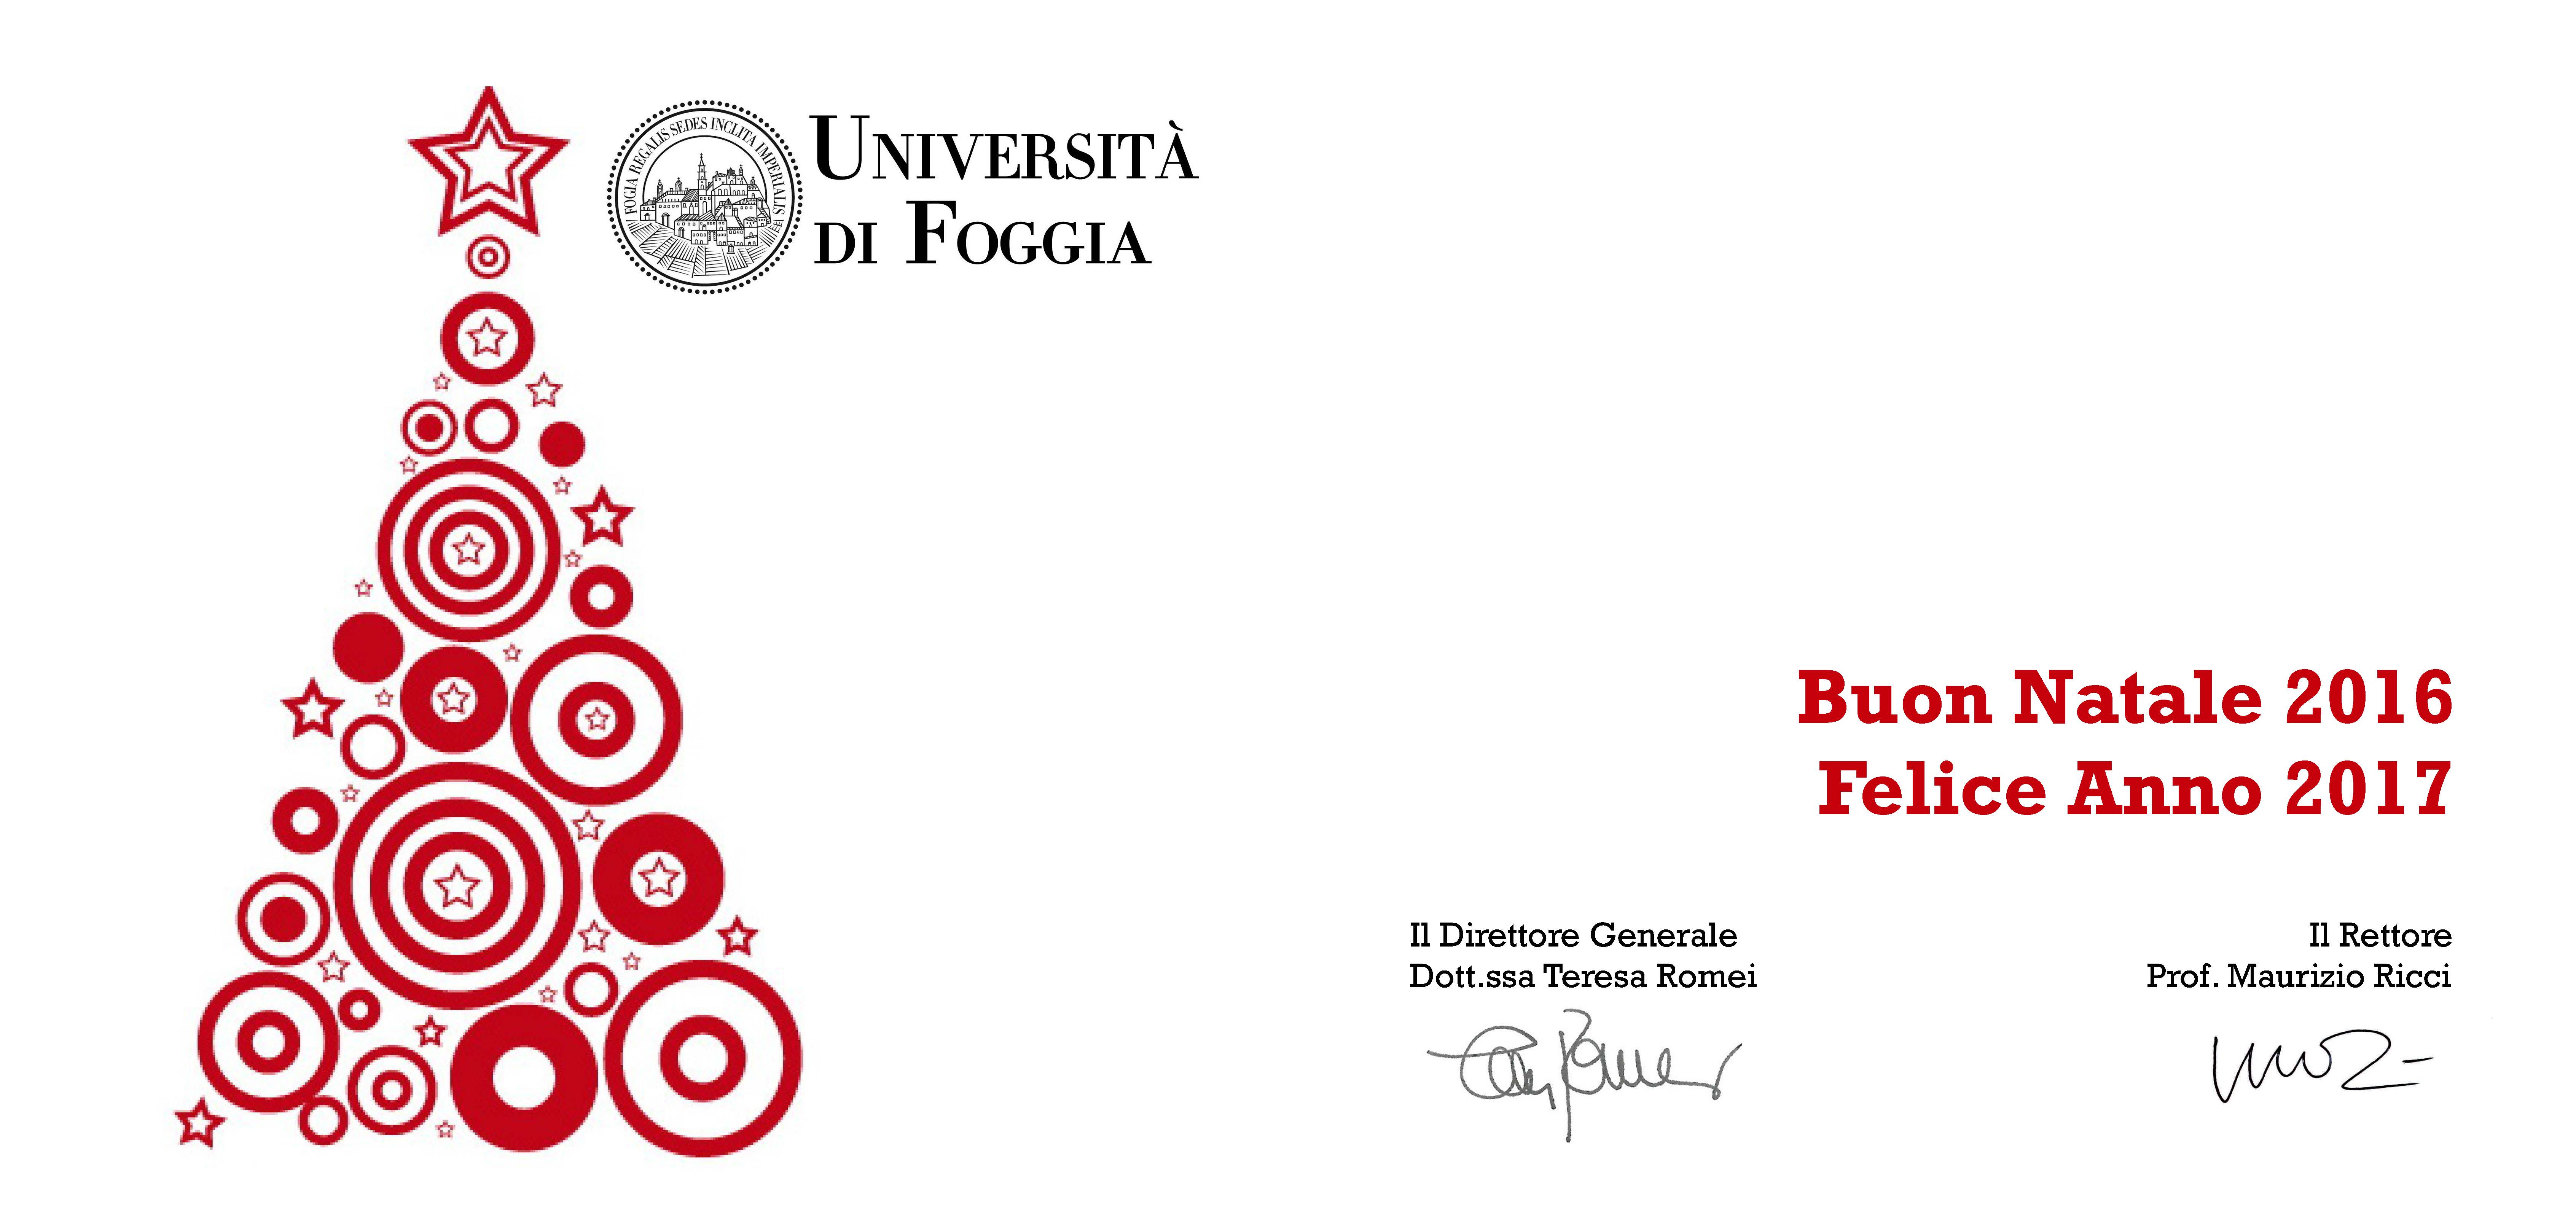 Greetings from University of Foggia